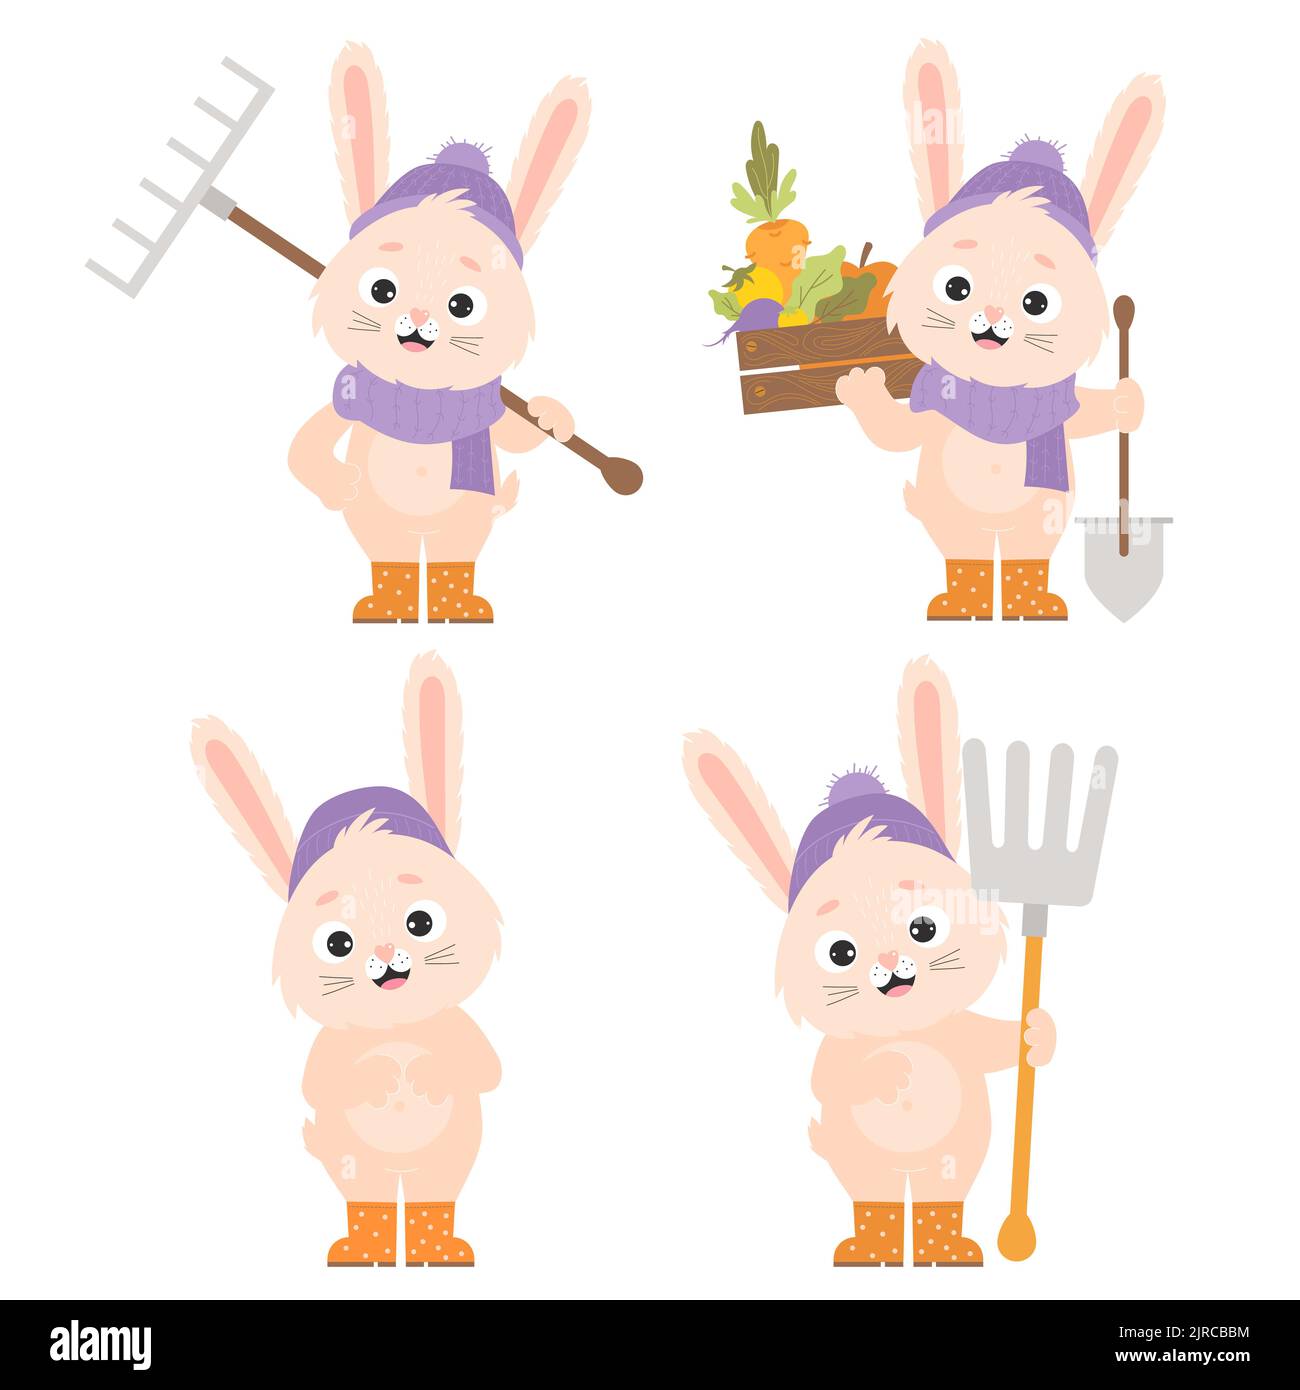 Collection cute cartoon characters of rabbit farmers. Happy bunnies in hat and rubber boots with rake, pitchfork and shovel and vegetable harvest wood Stock Vector